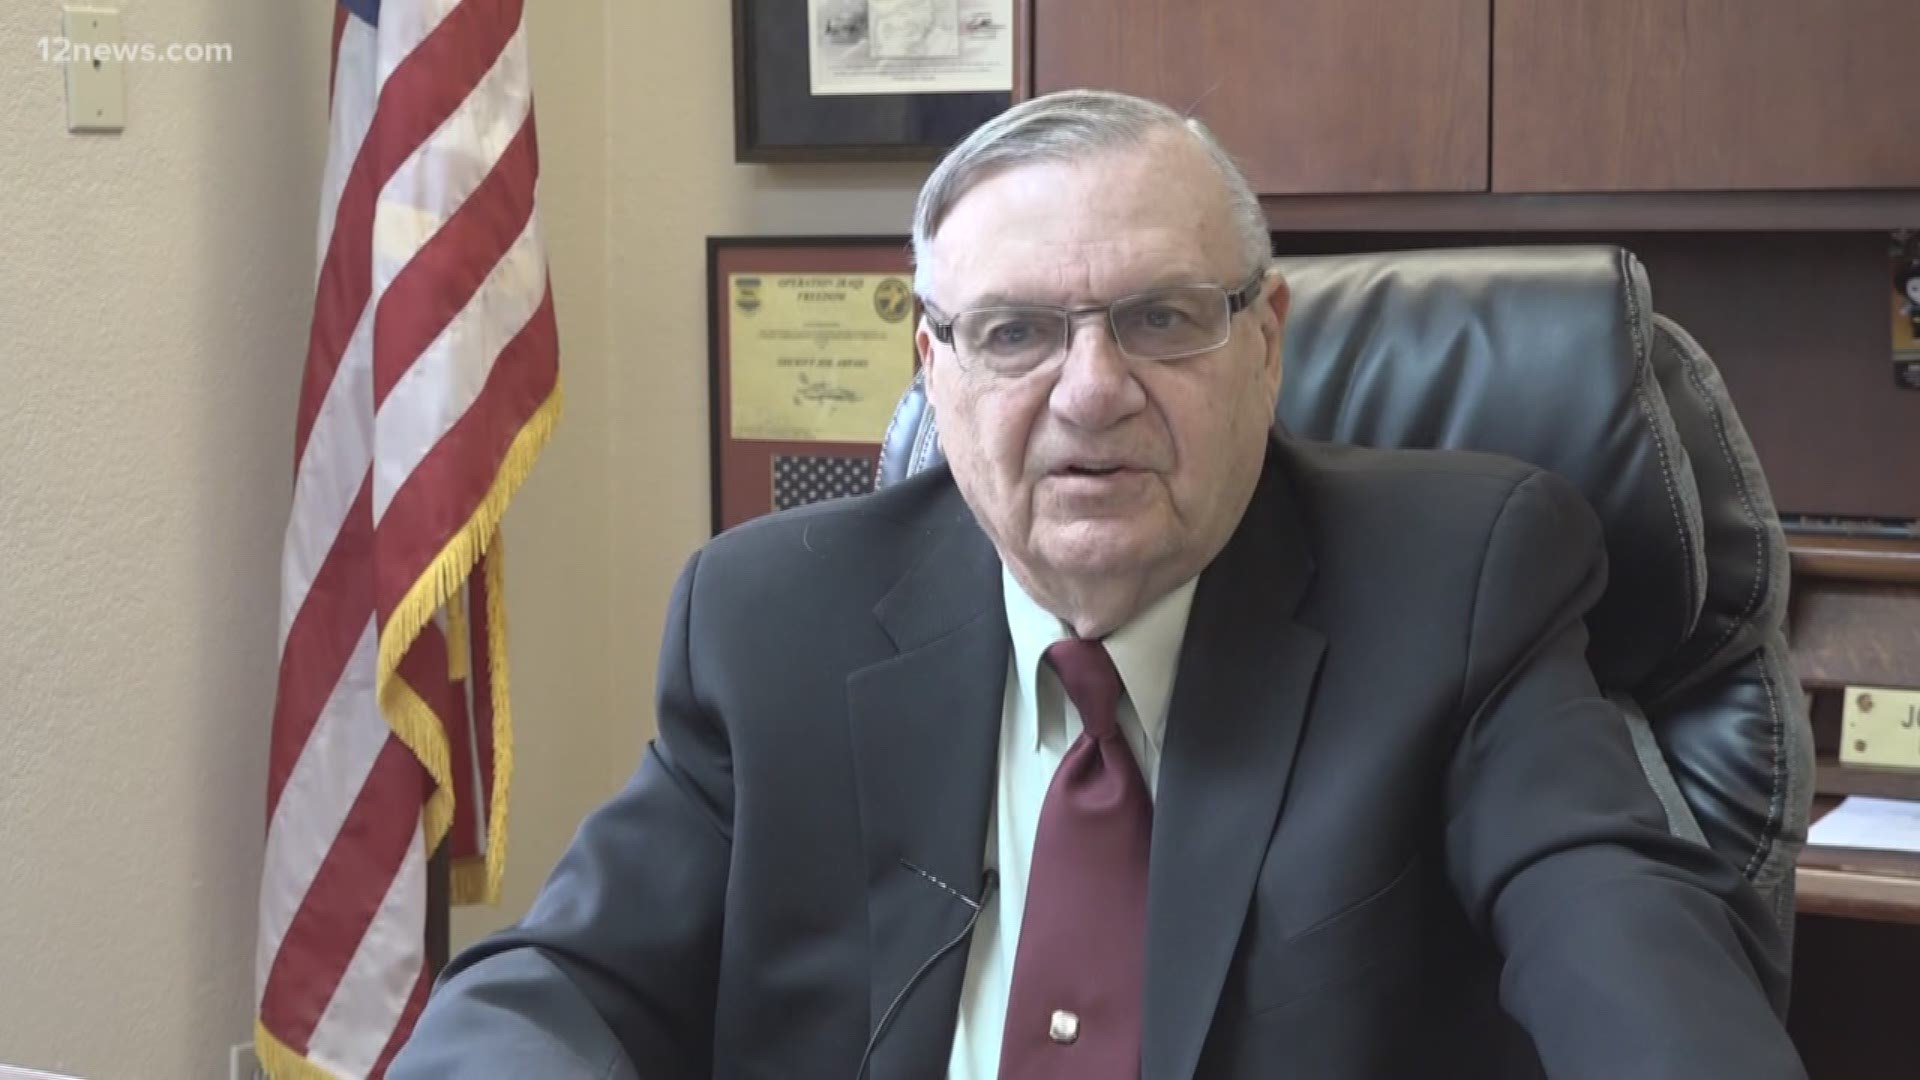 Despite his pardon from President Trump, Arpaio's criminal conviction for contempt of court stands. Will that stop him from running for U.S. Senate?